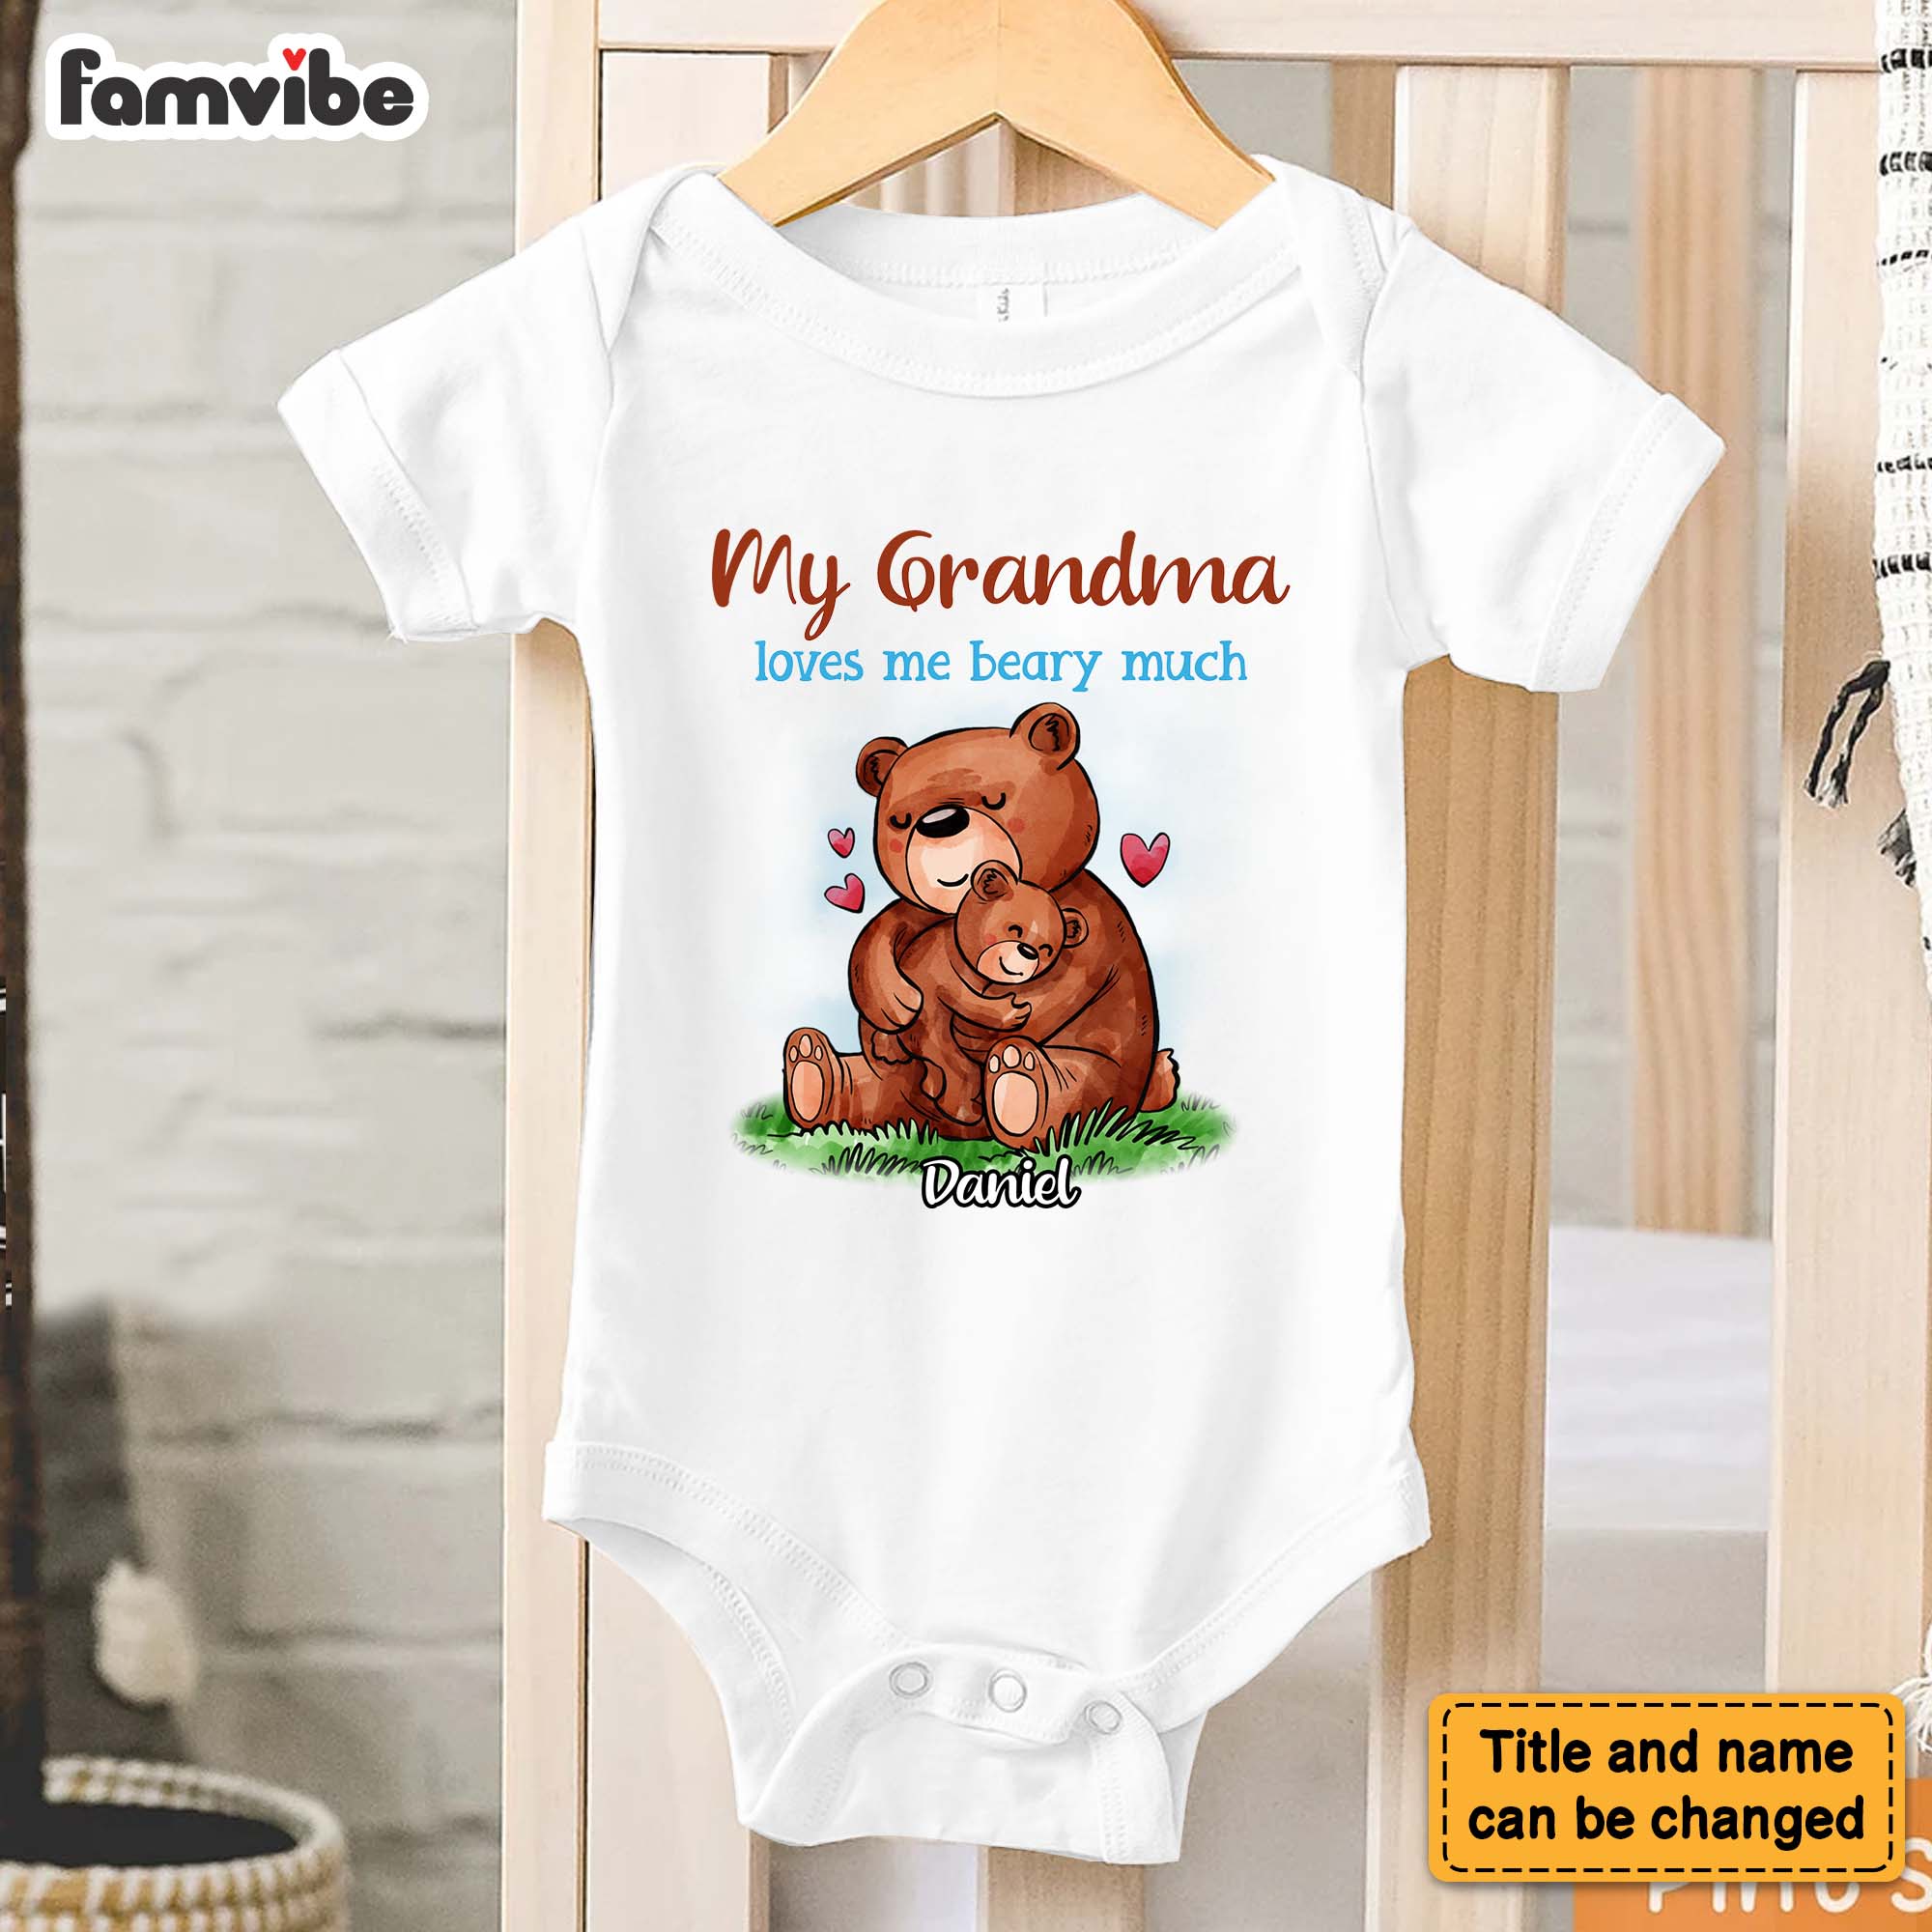 Personalized Newborn Baby Gifts Love Me Beary Much Baby Onesie 27785 Primary Mockup